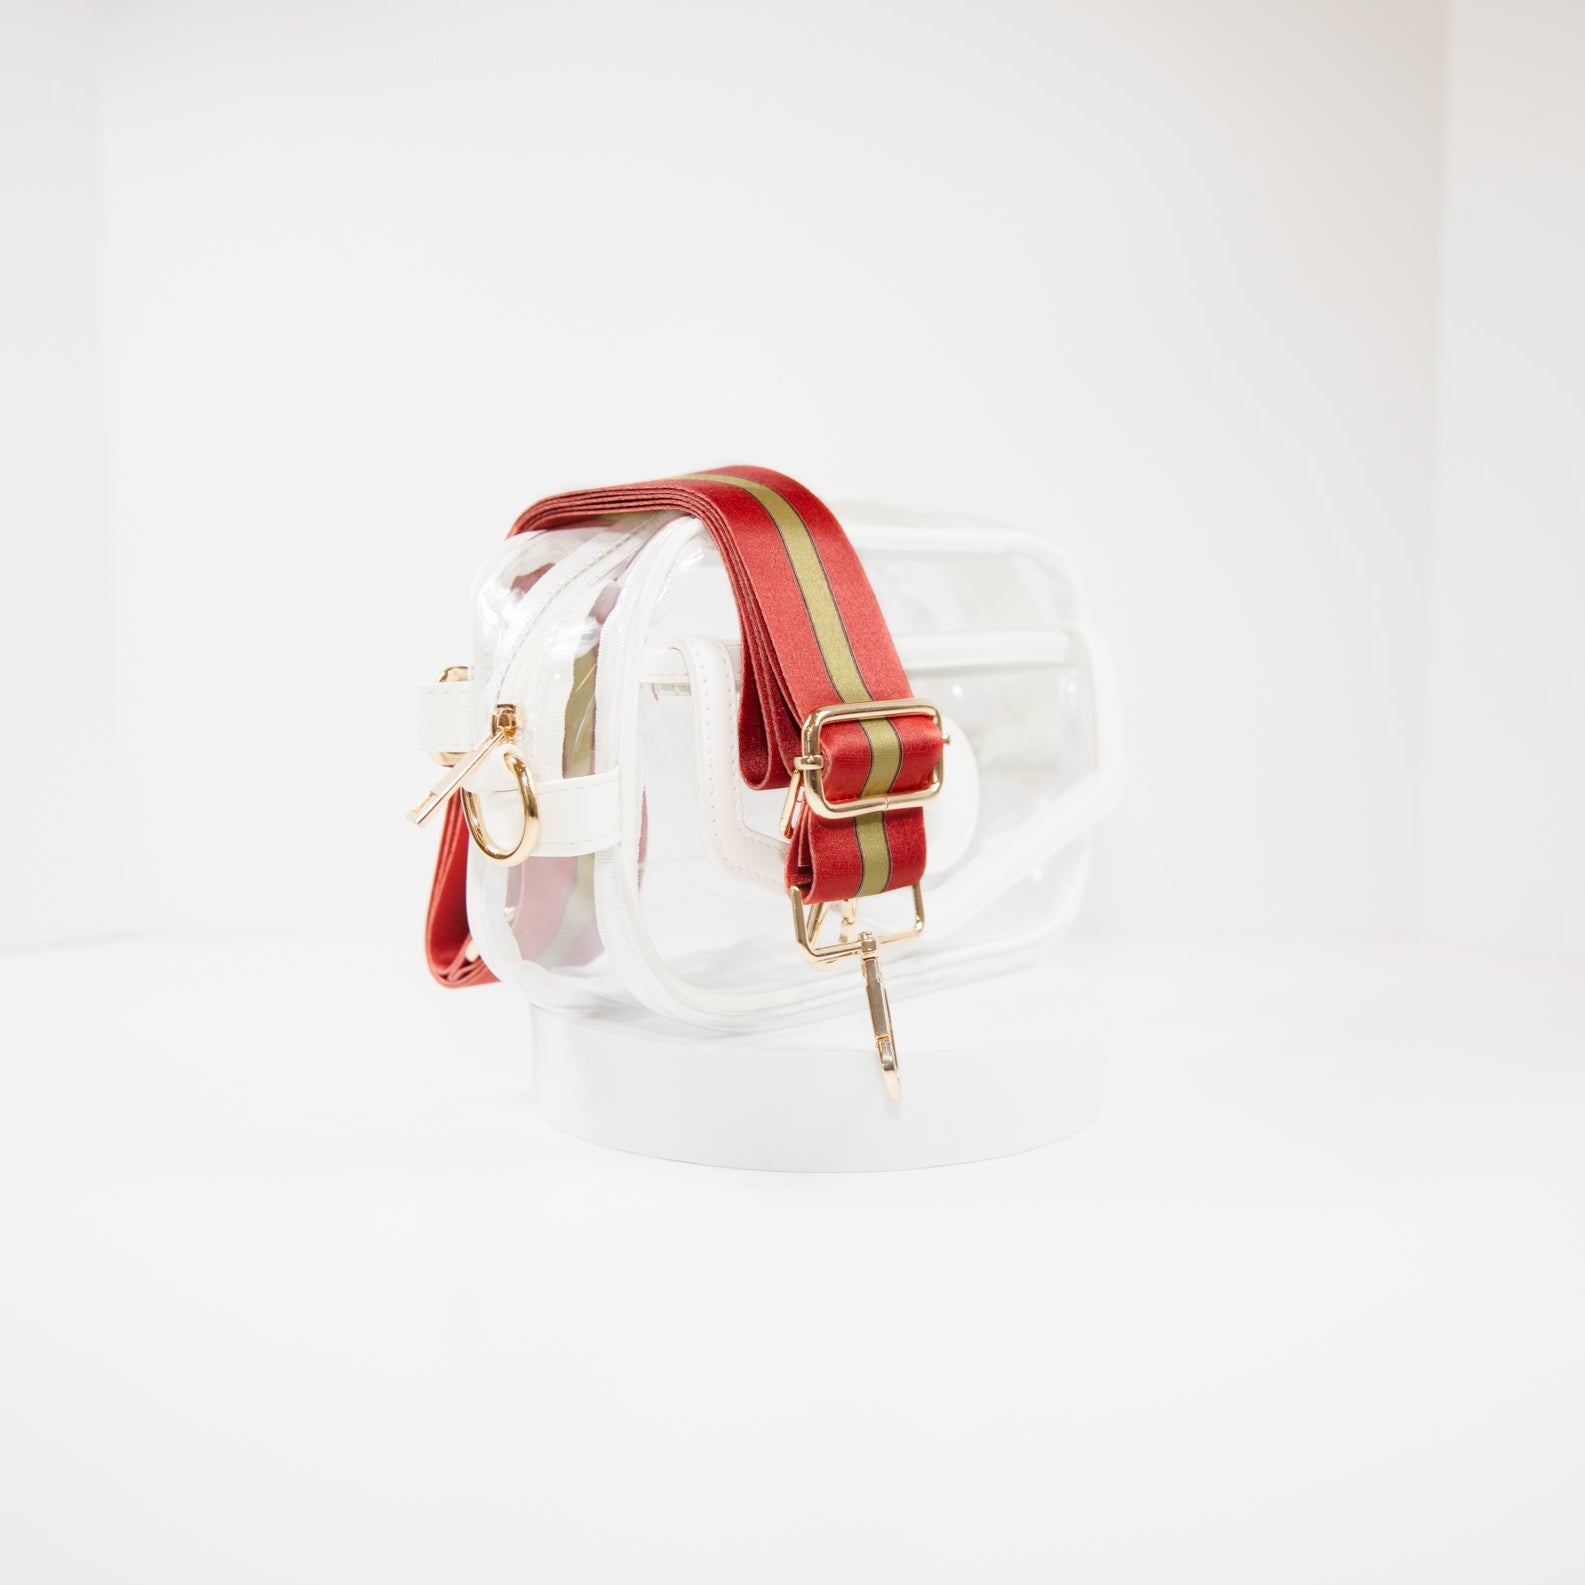 Clear Stadium Bag in white leather trim, side facing, with a crossbody strap in San Francisco 49er team colors.